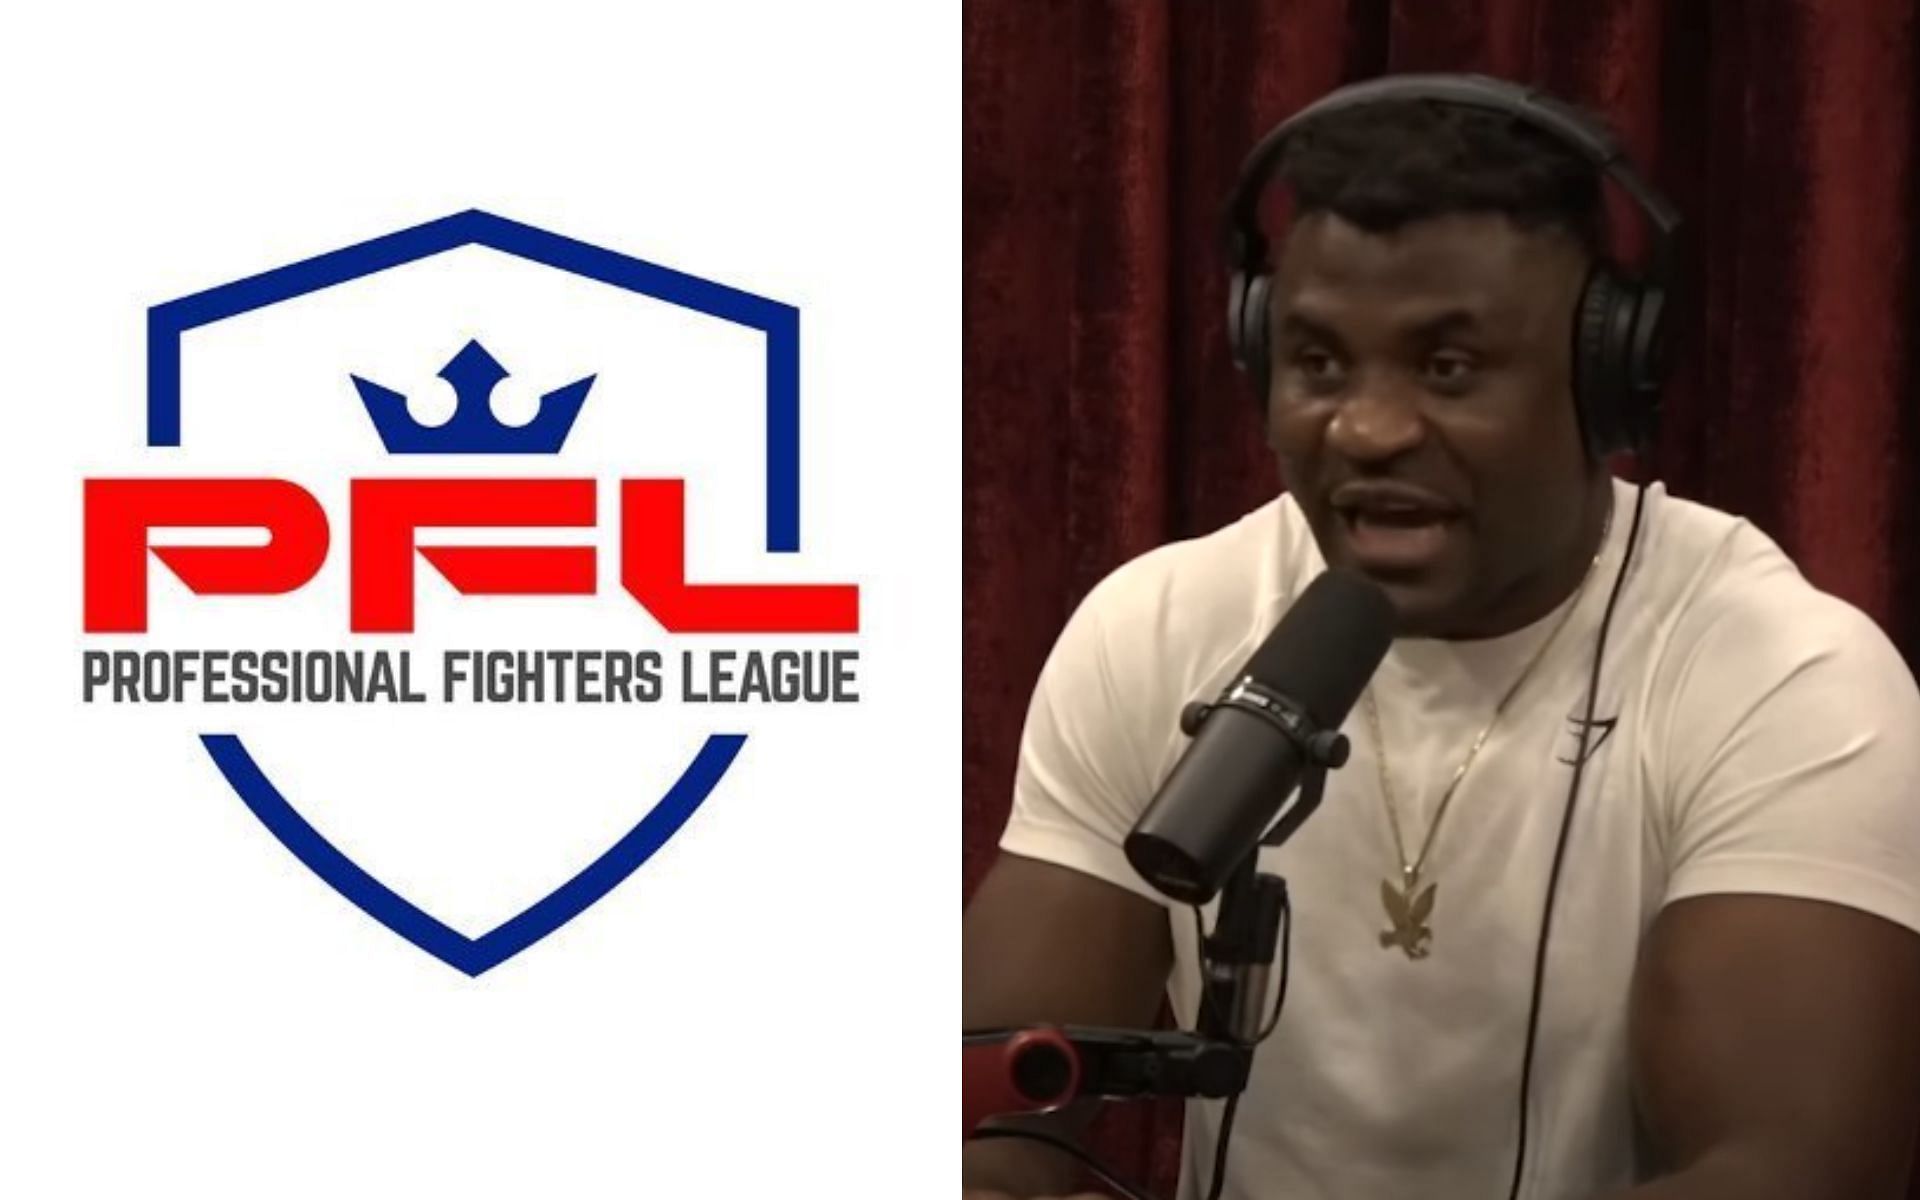 PFL logo [Left], and Francis Ngannou [Right] [Photo credit: @PFLMMA - X, and PowerfulJRE - YouTube]